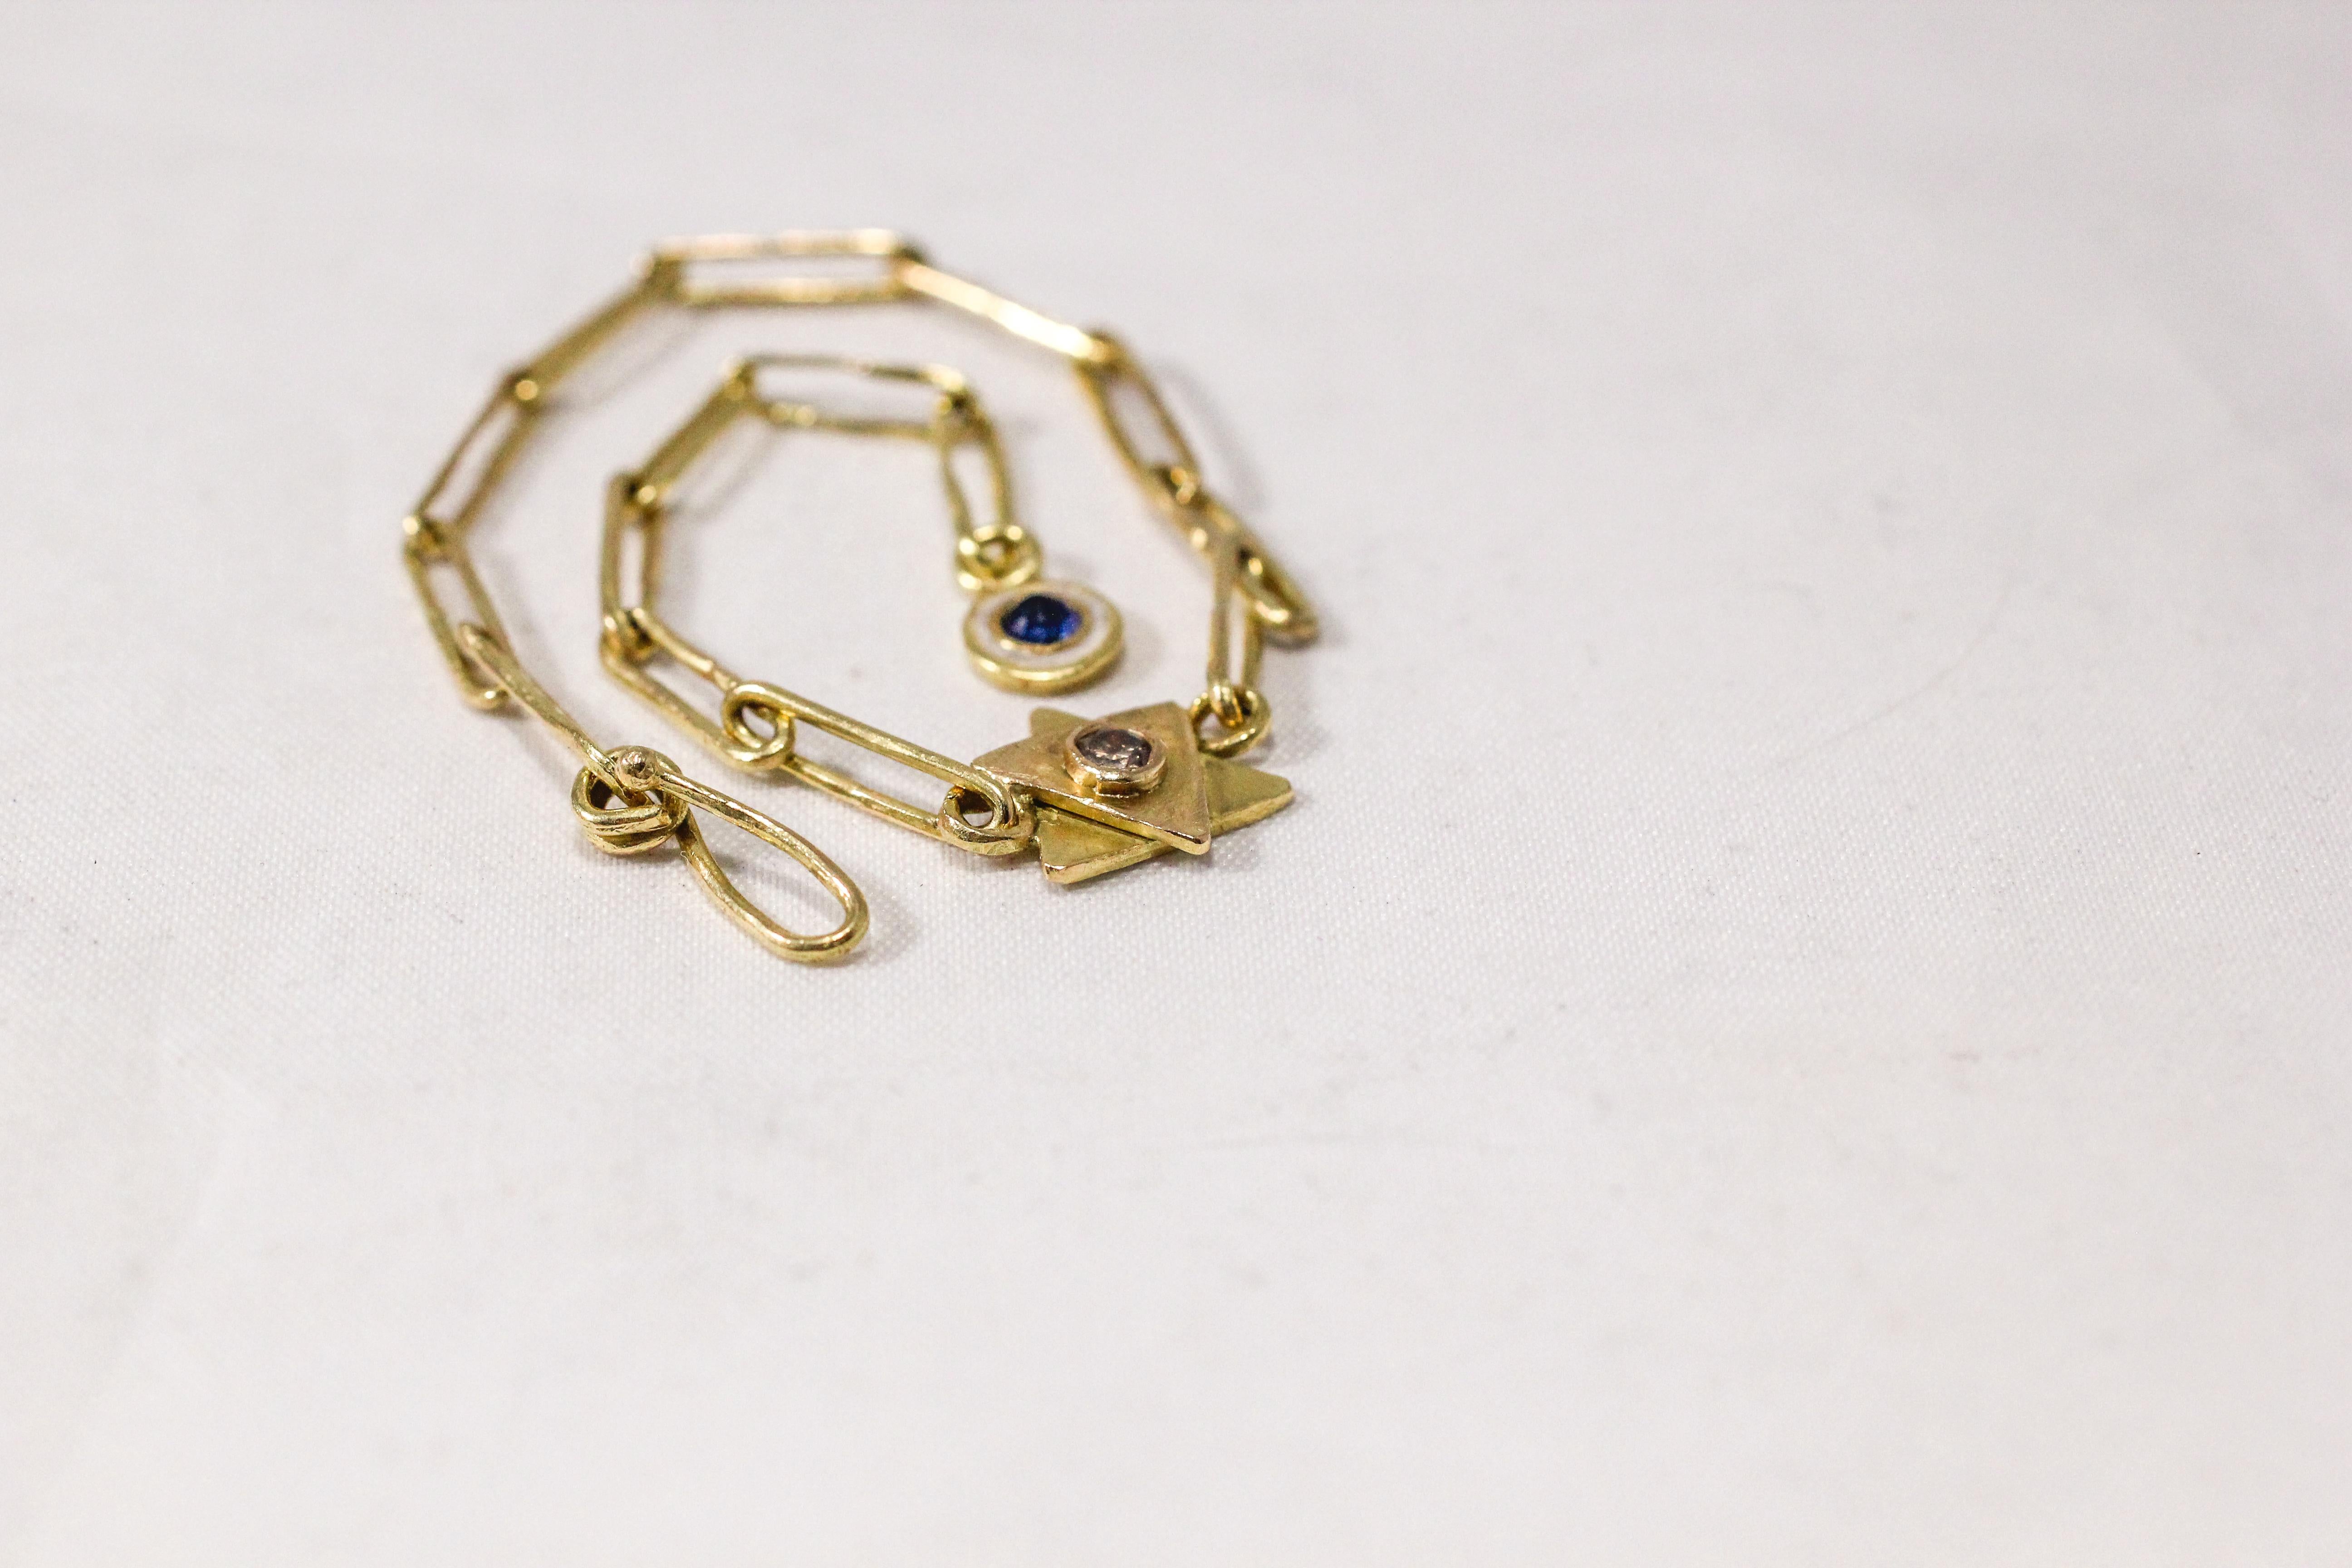 Custom listing. This unique Magen David chain link charm bracelet is handcrafted in environmentally friendly recycled 18K gold. The bracelet is made up of Diamond inset Magen David, elongated oval shaped links, and is terminated with the enameled